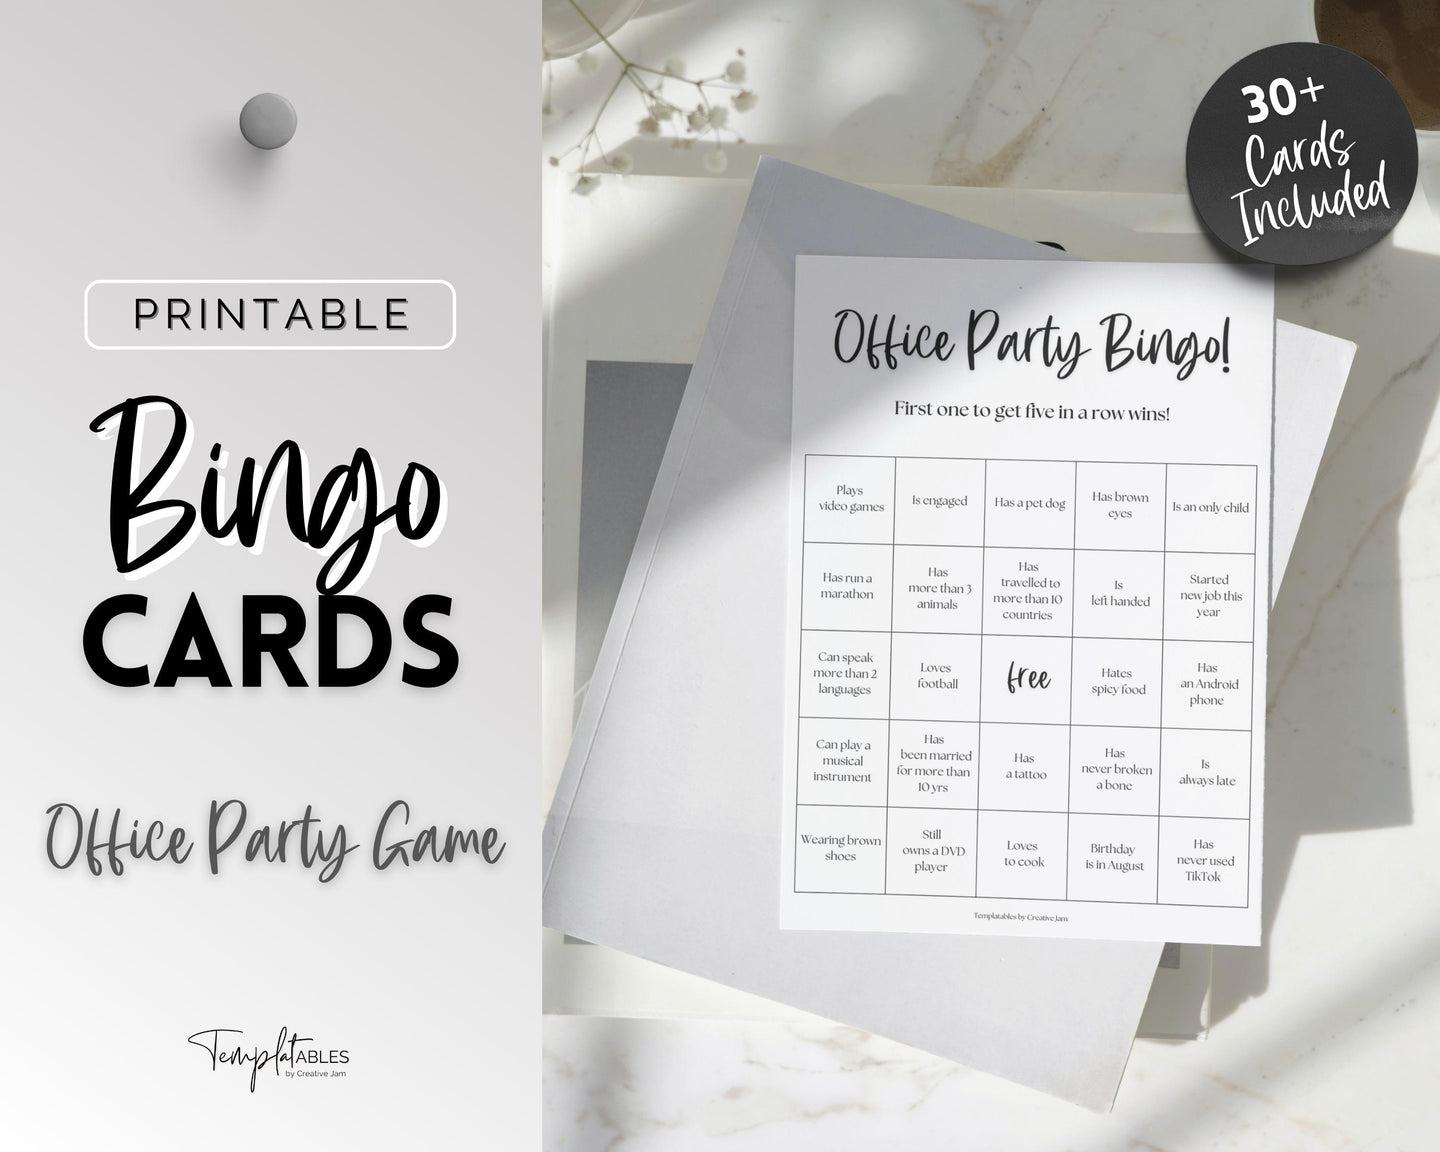 Office Bingo: Fun Icebreaker Game for Workplace, Retirement, and Get-to-Know-You Parties - Includes Human Bingo and Find the Guest Who